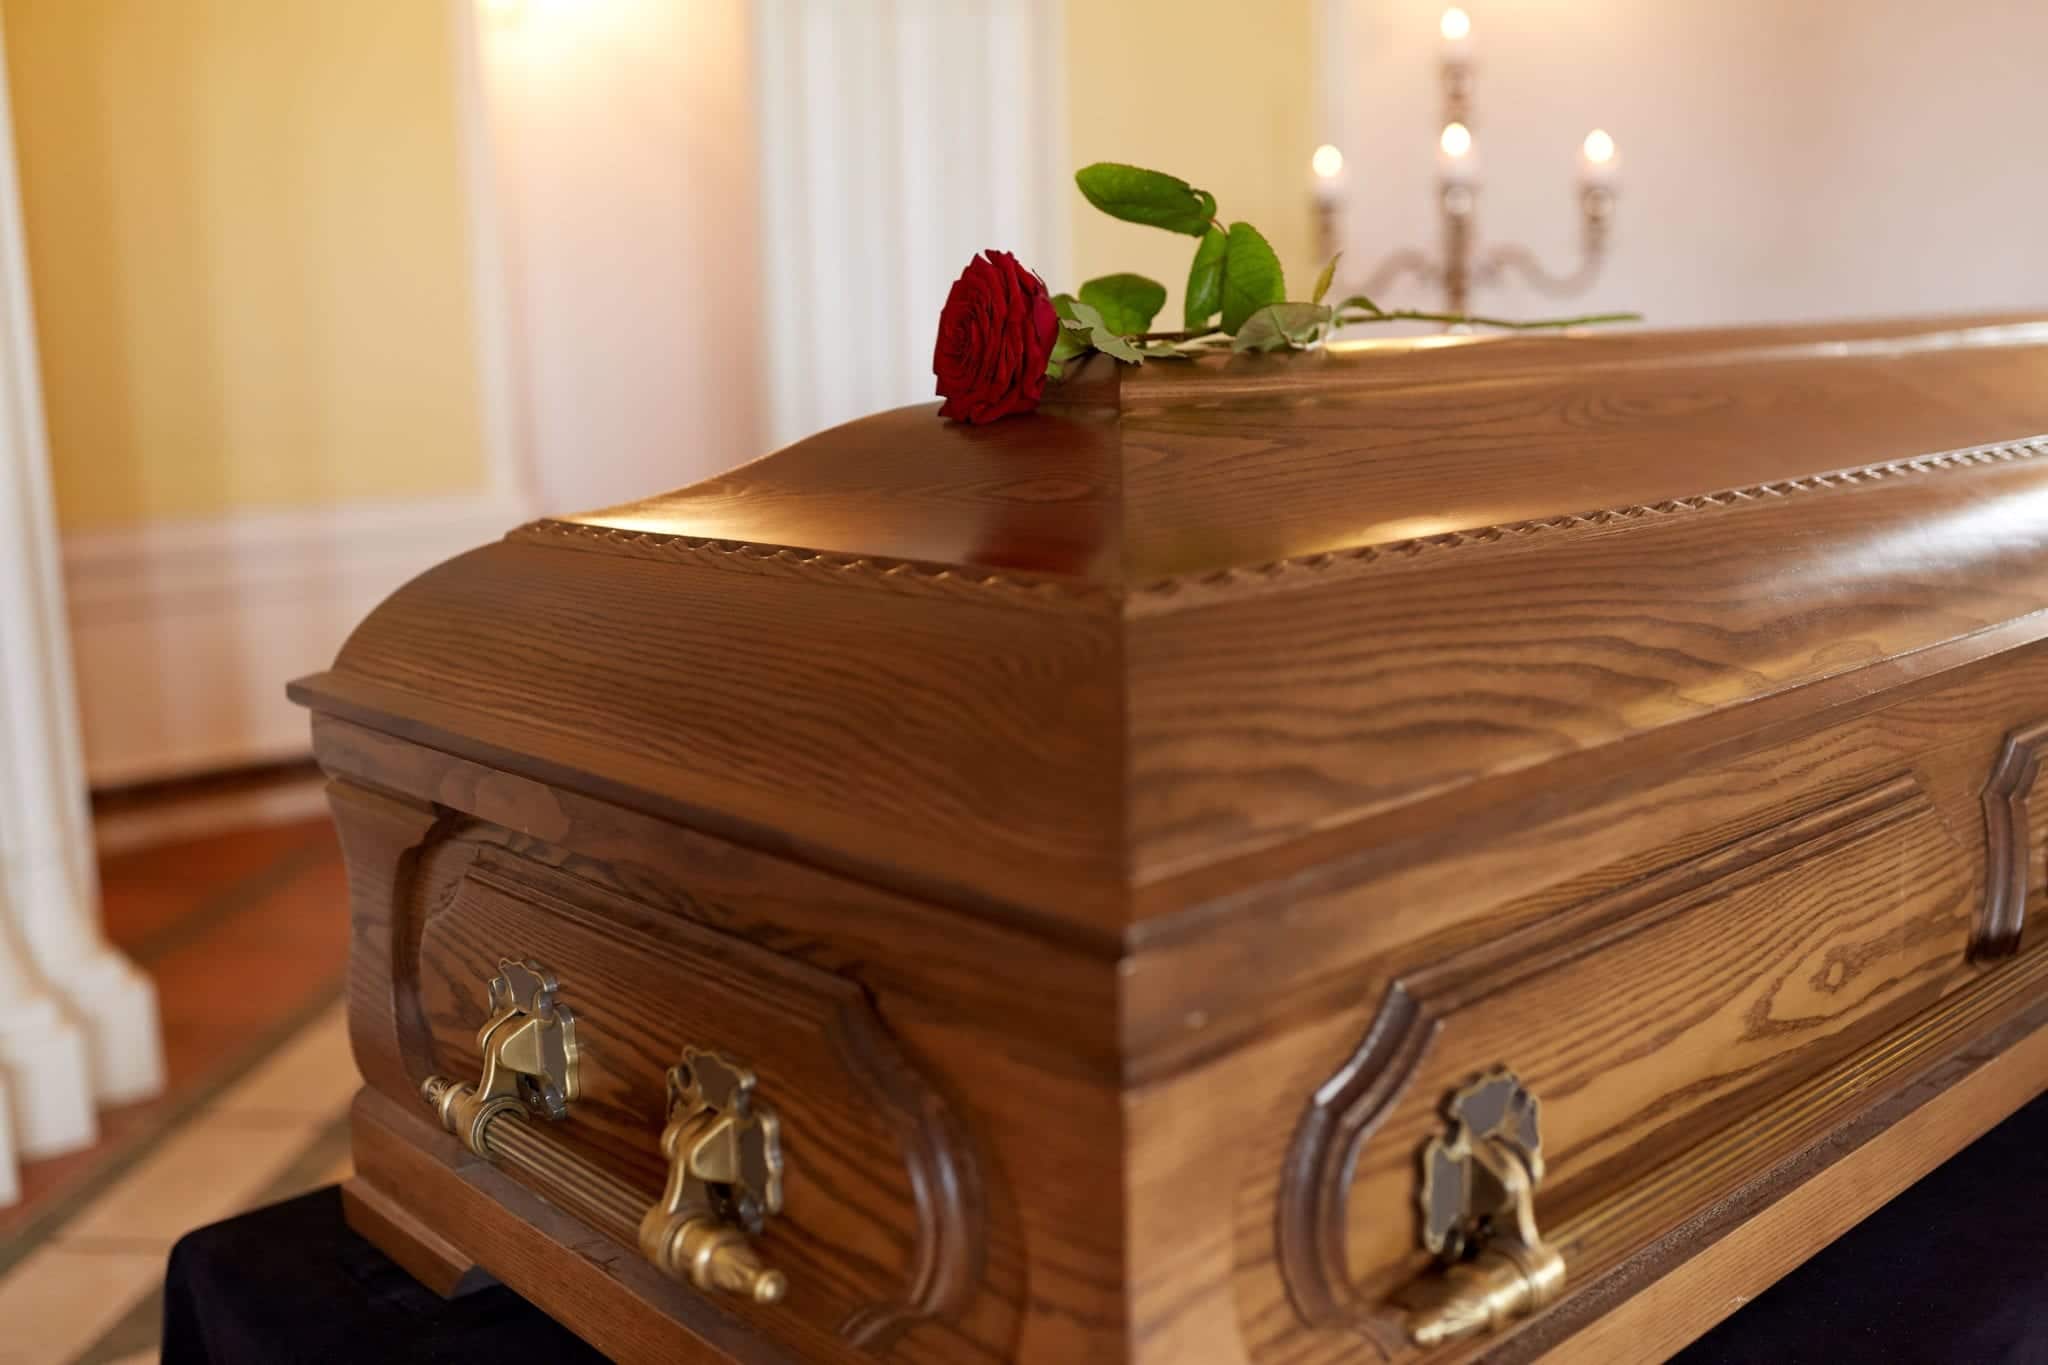 What Makes a Death "Wrongful" In Florida?